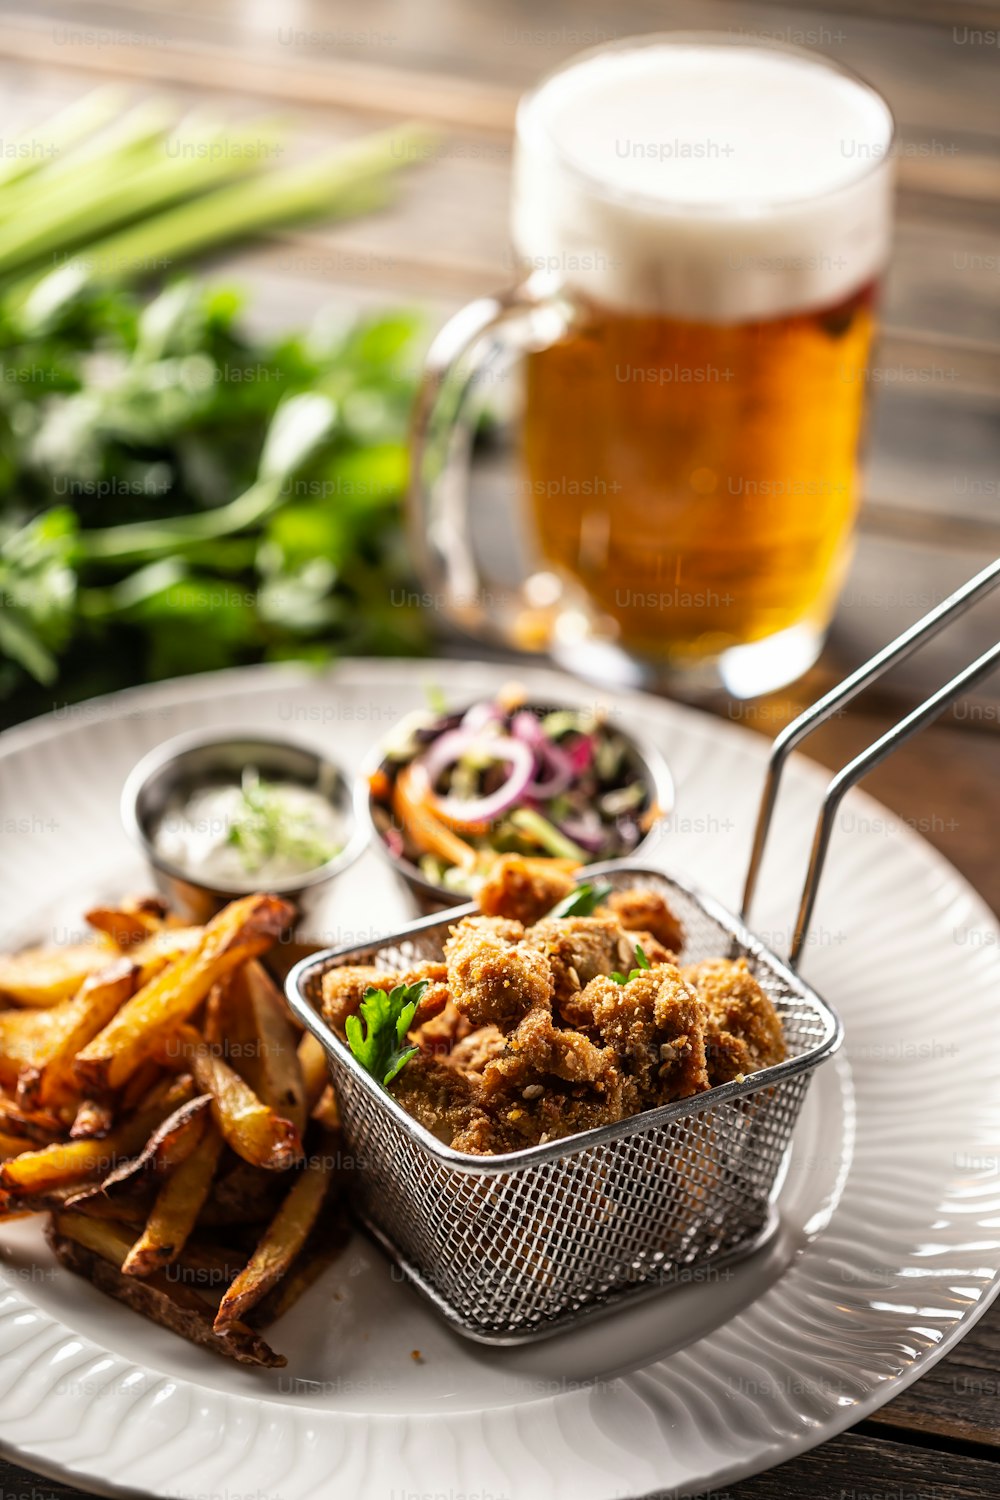 Fried chicken nuggets with french fries, dip, salad and beer.